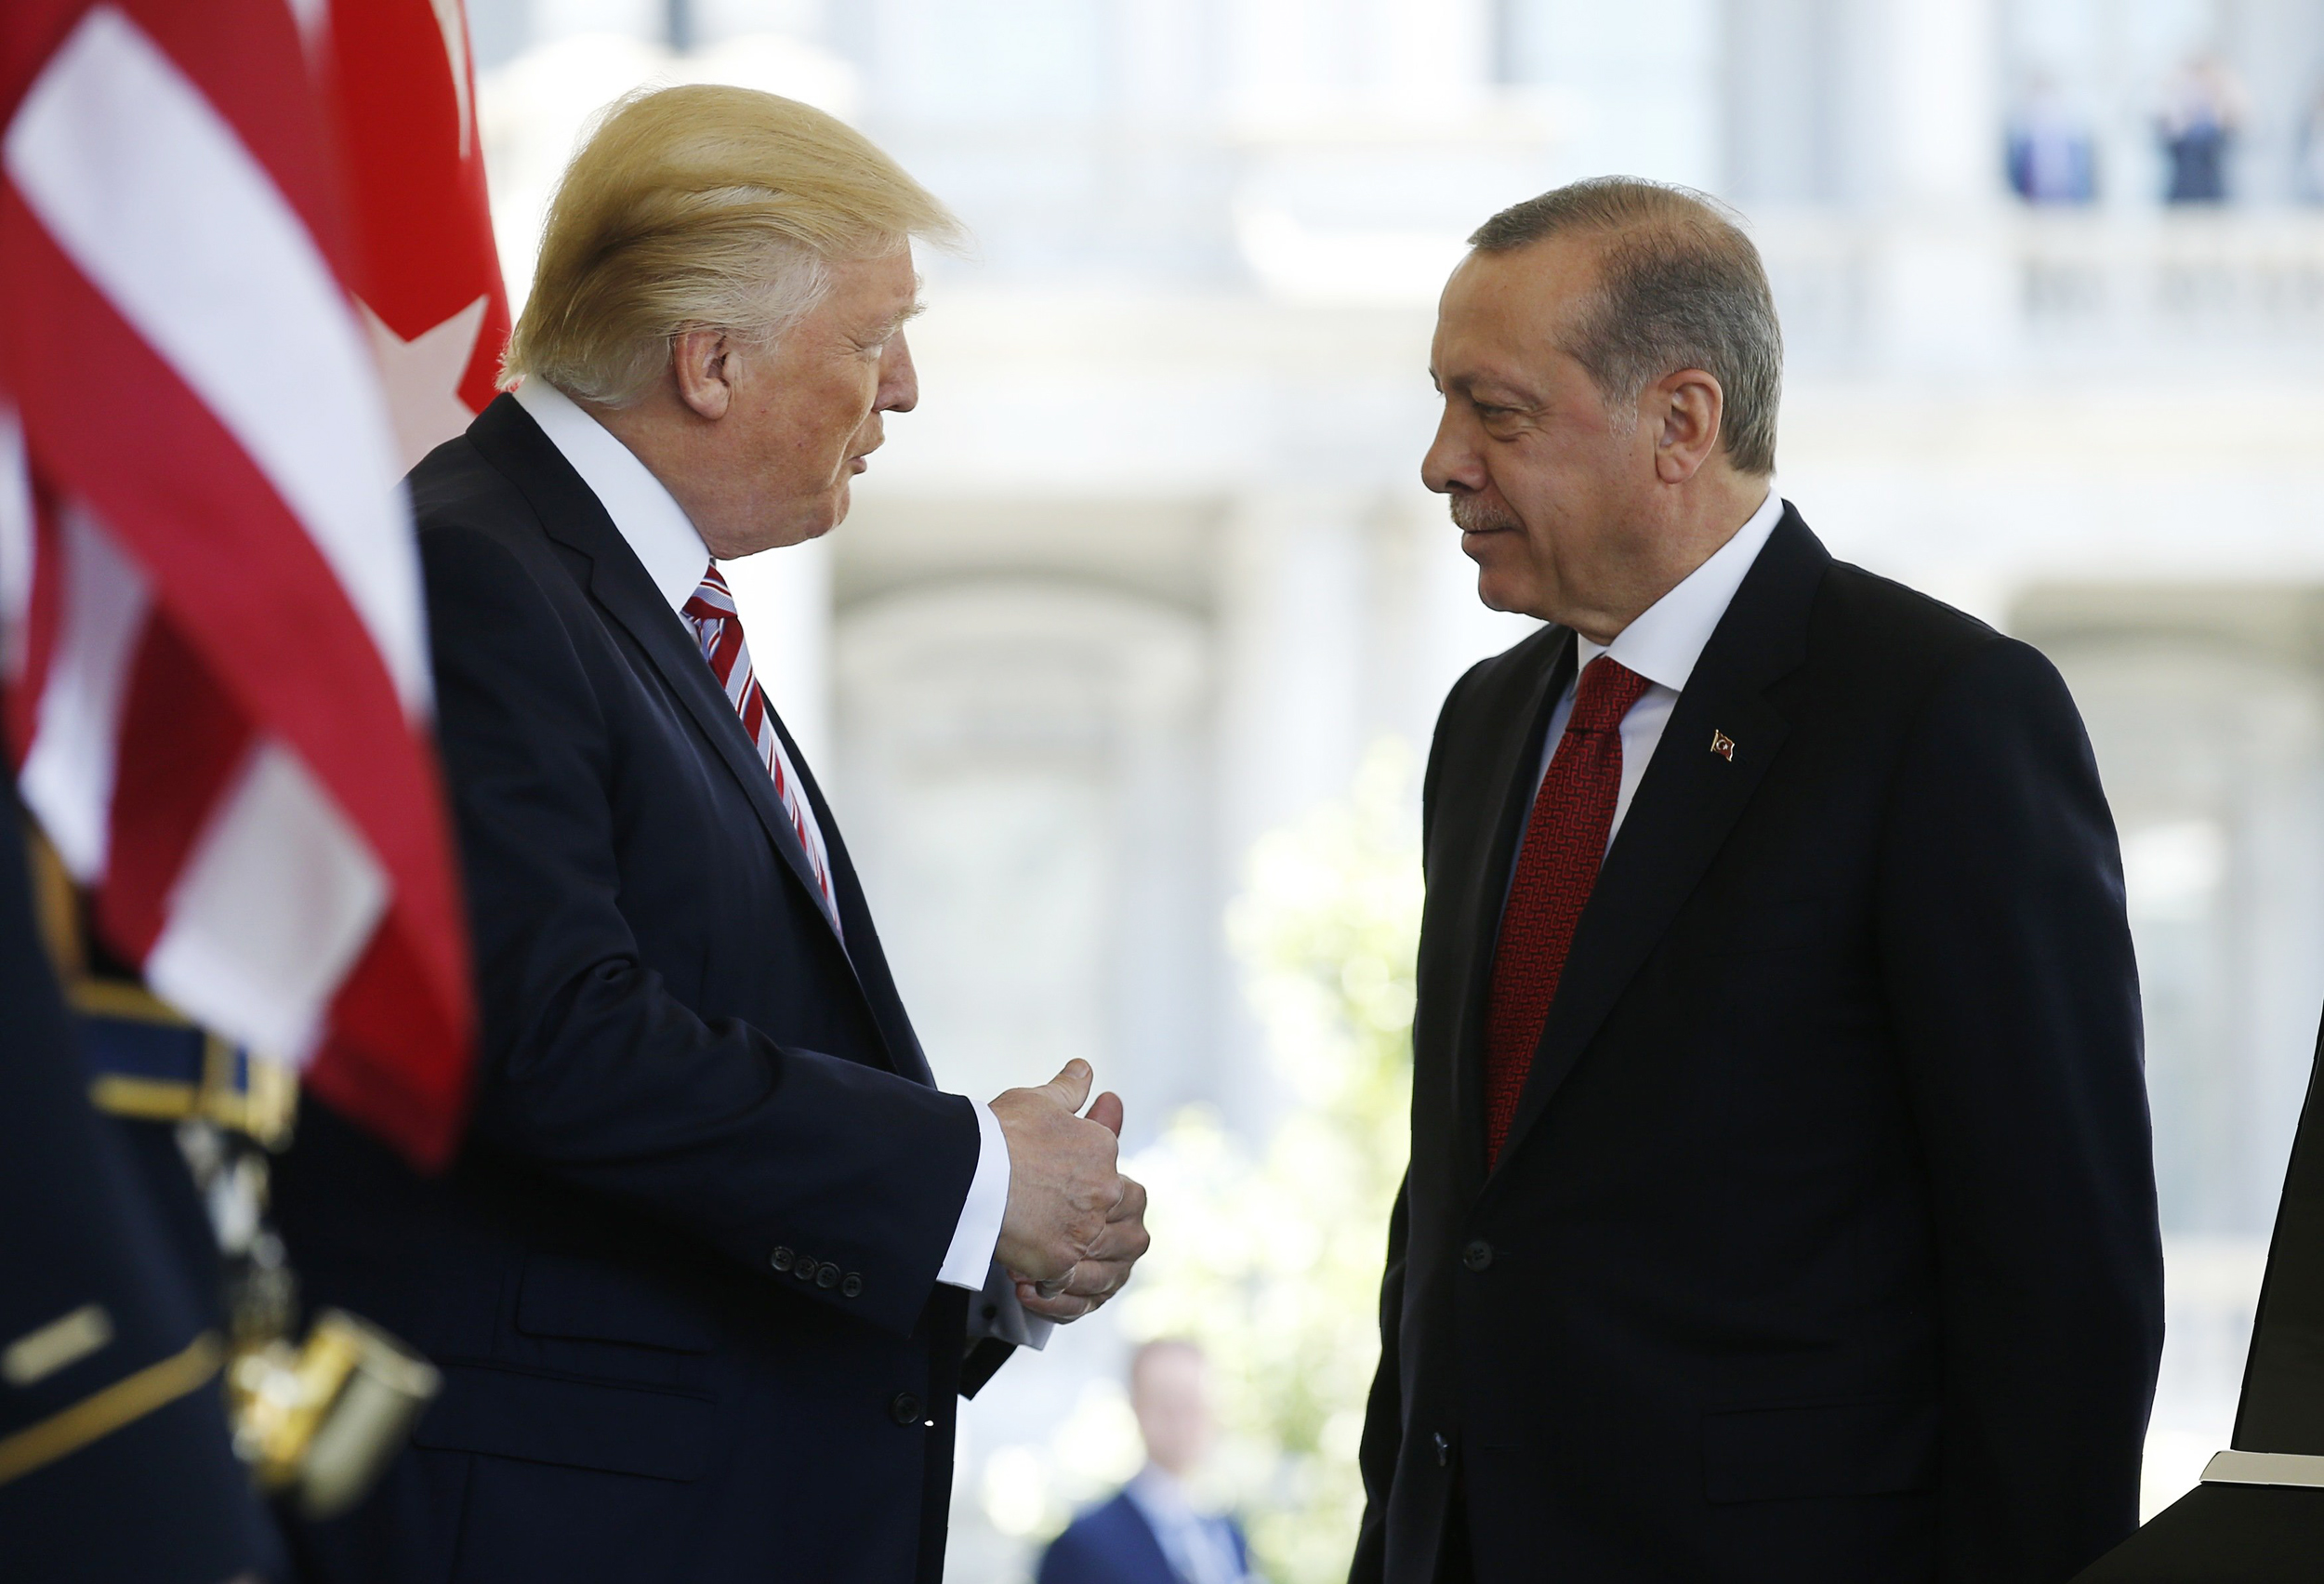 Image: President Trump talks with Turkey's President Erdogan at the entrance to the West Wing of the White House in Washington